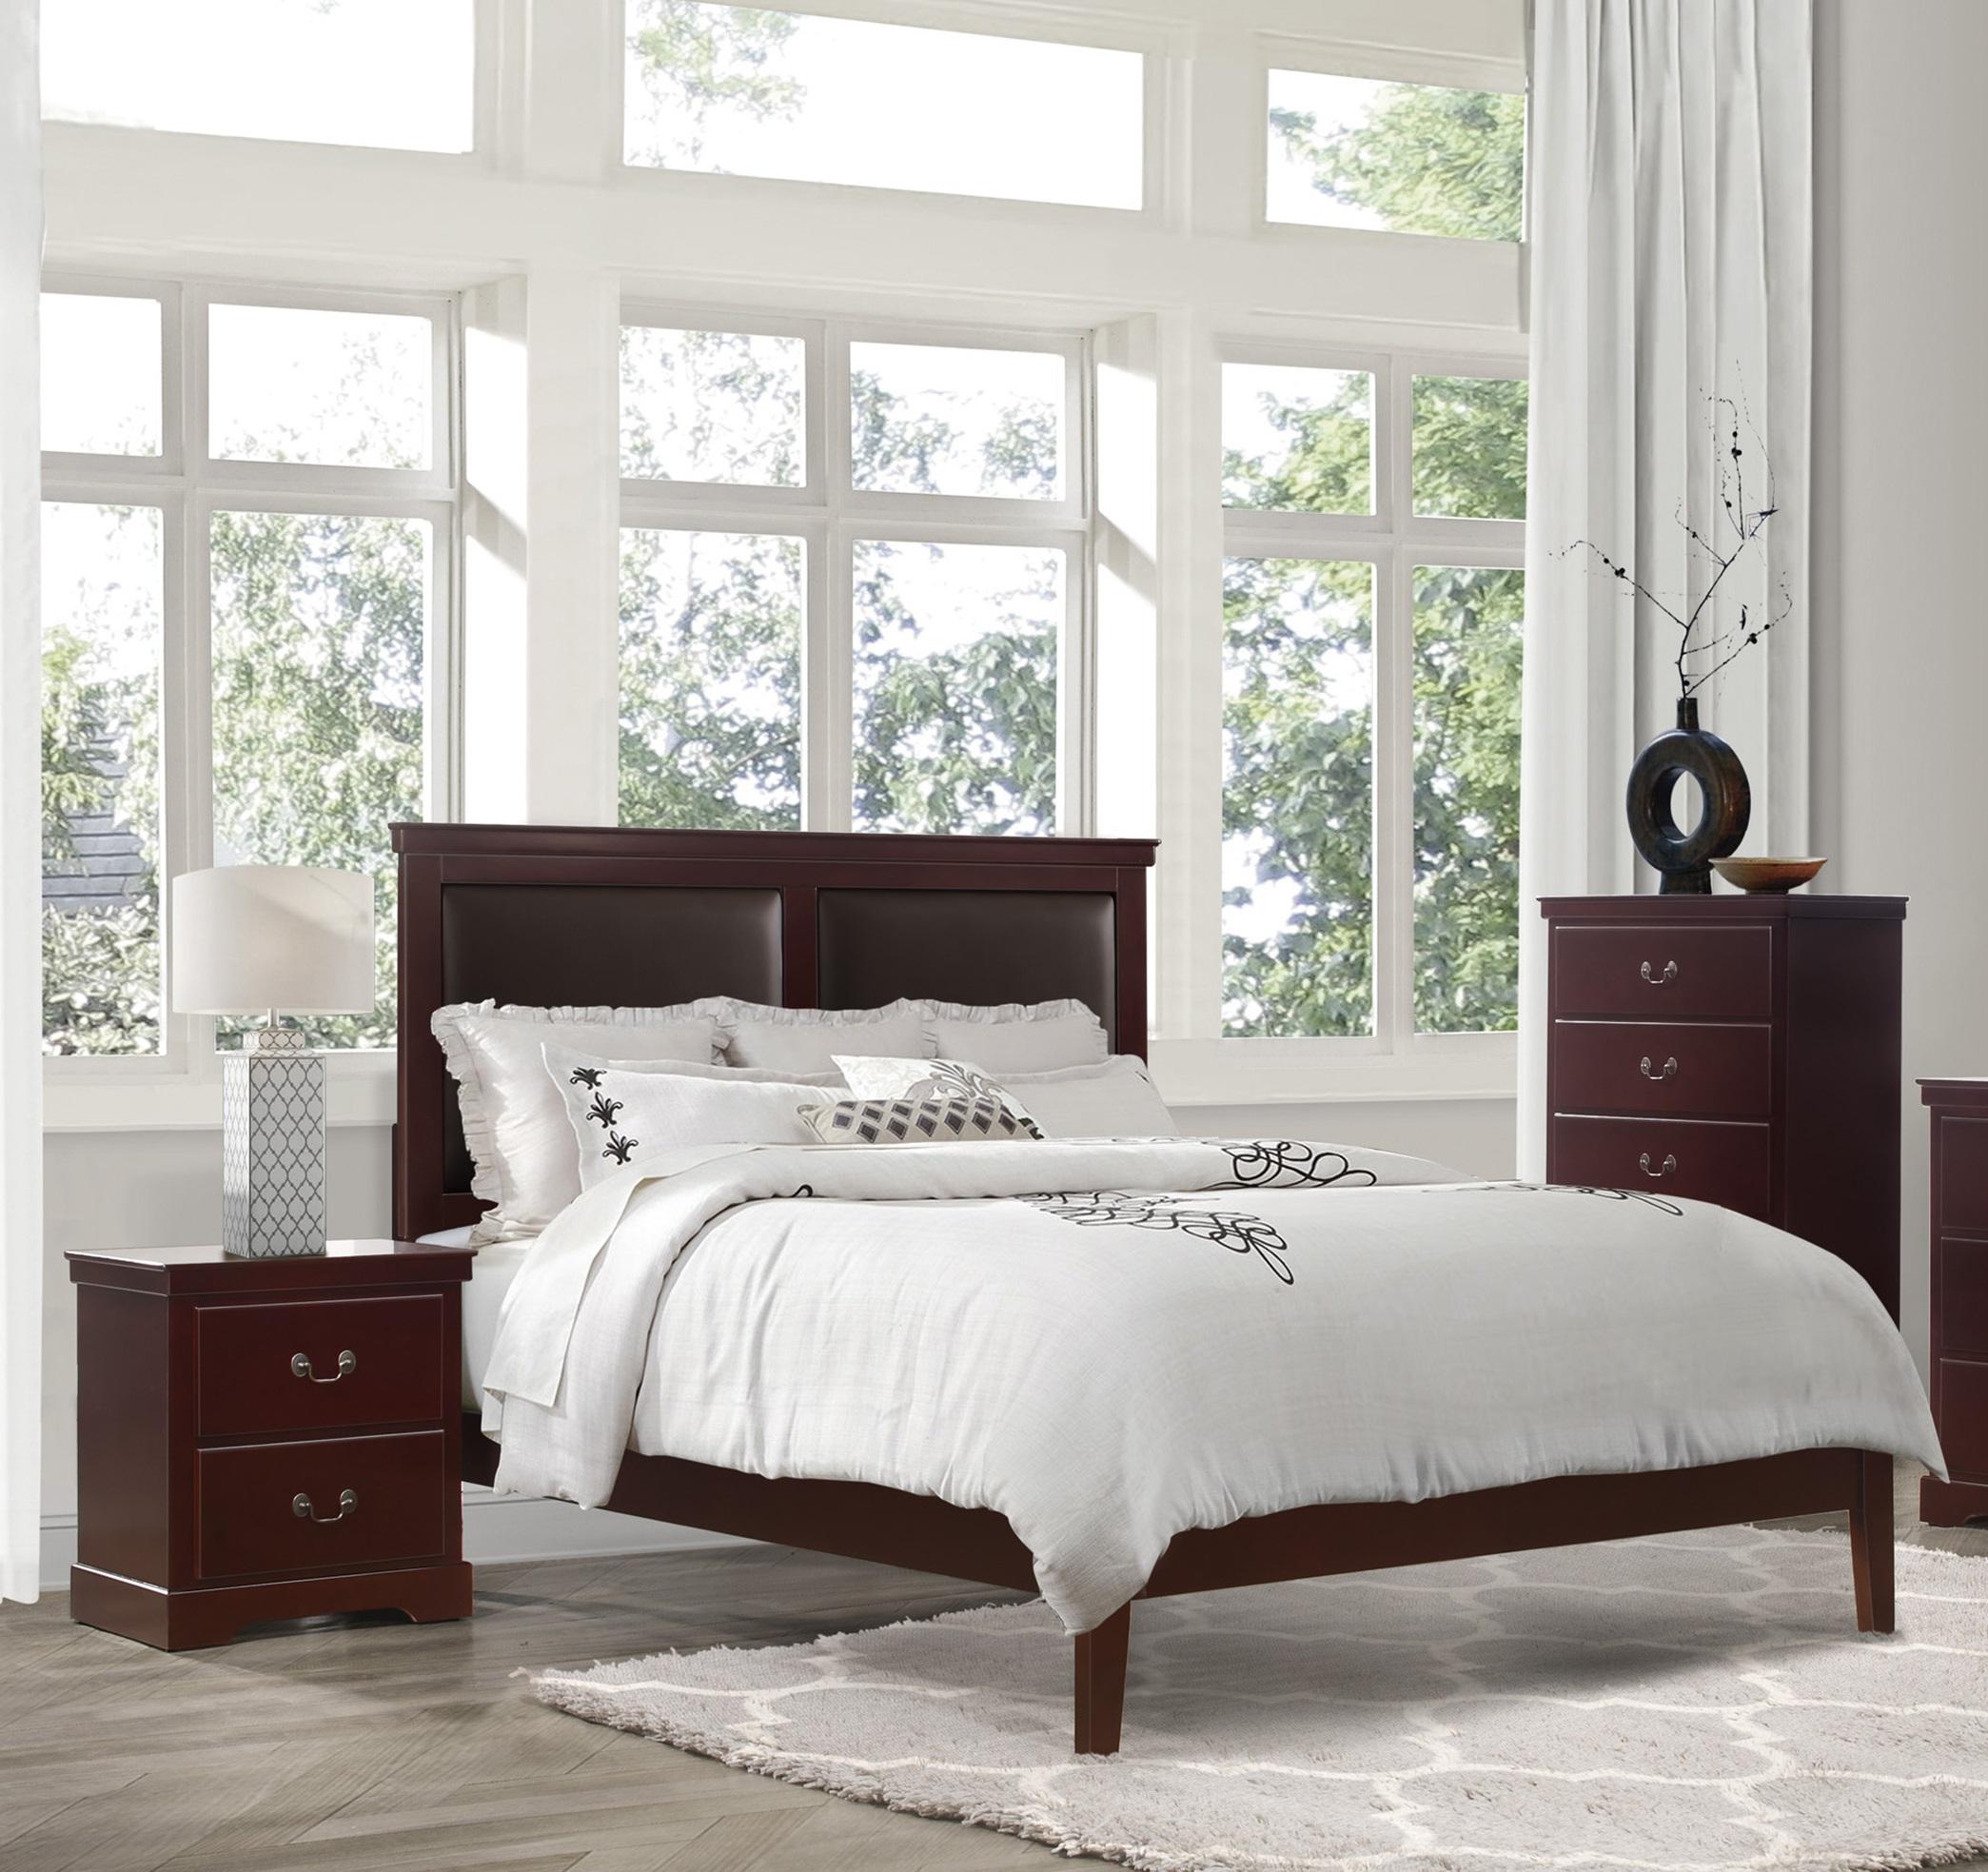 Modern Bedroom Set 1519CHK-1CK-3PC Seabright 1519CHK-1CK-3PC in Cherry Faux Leather